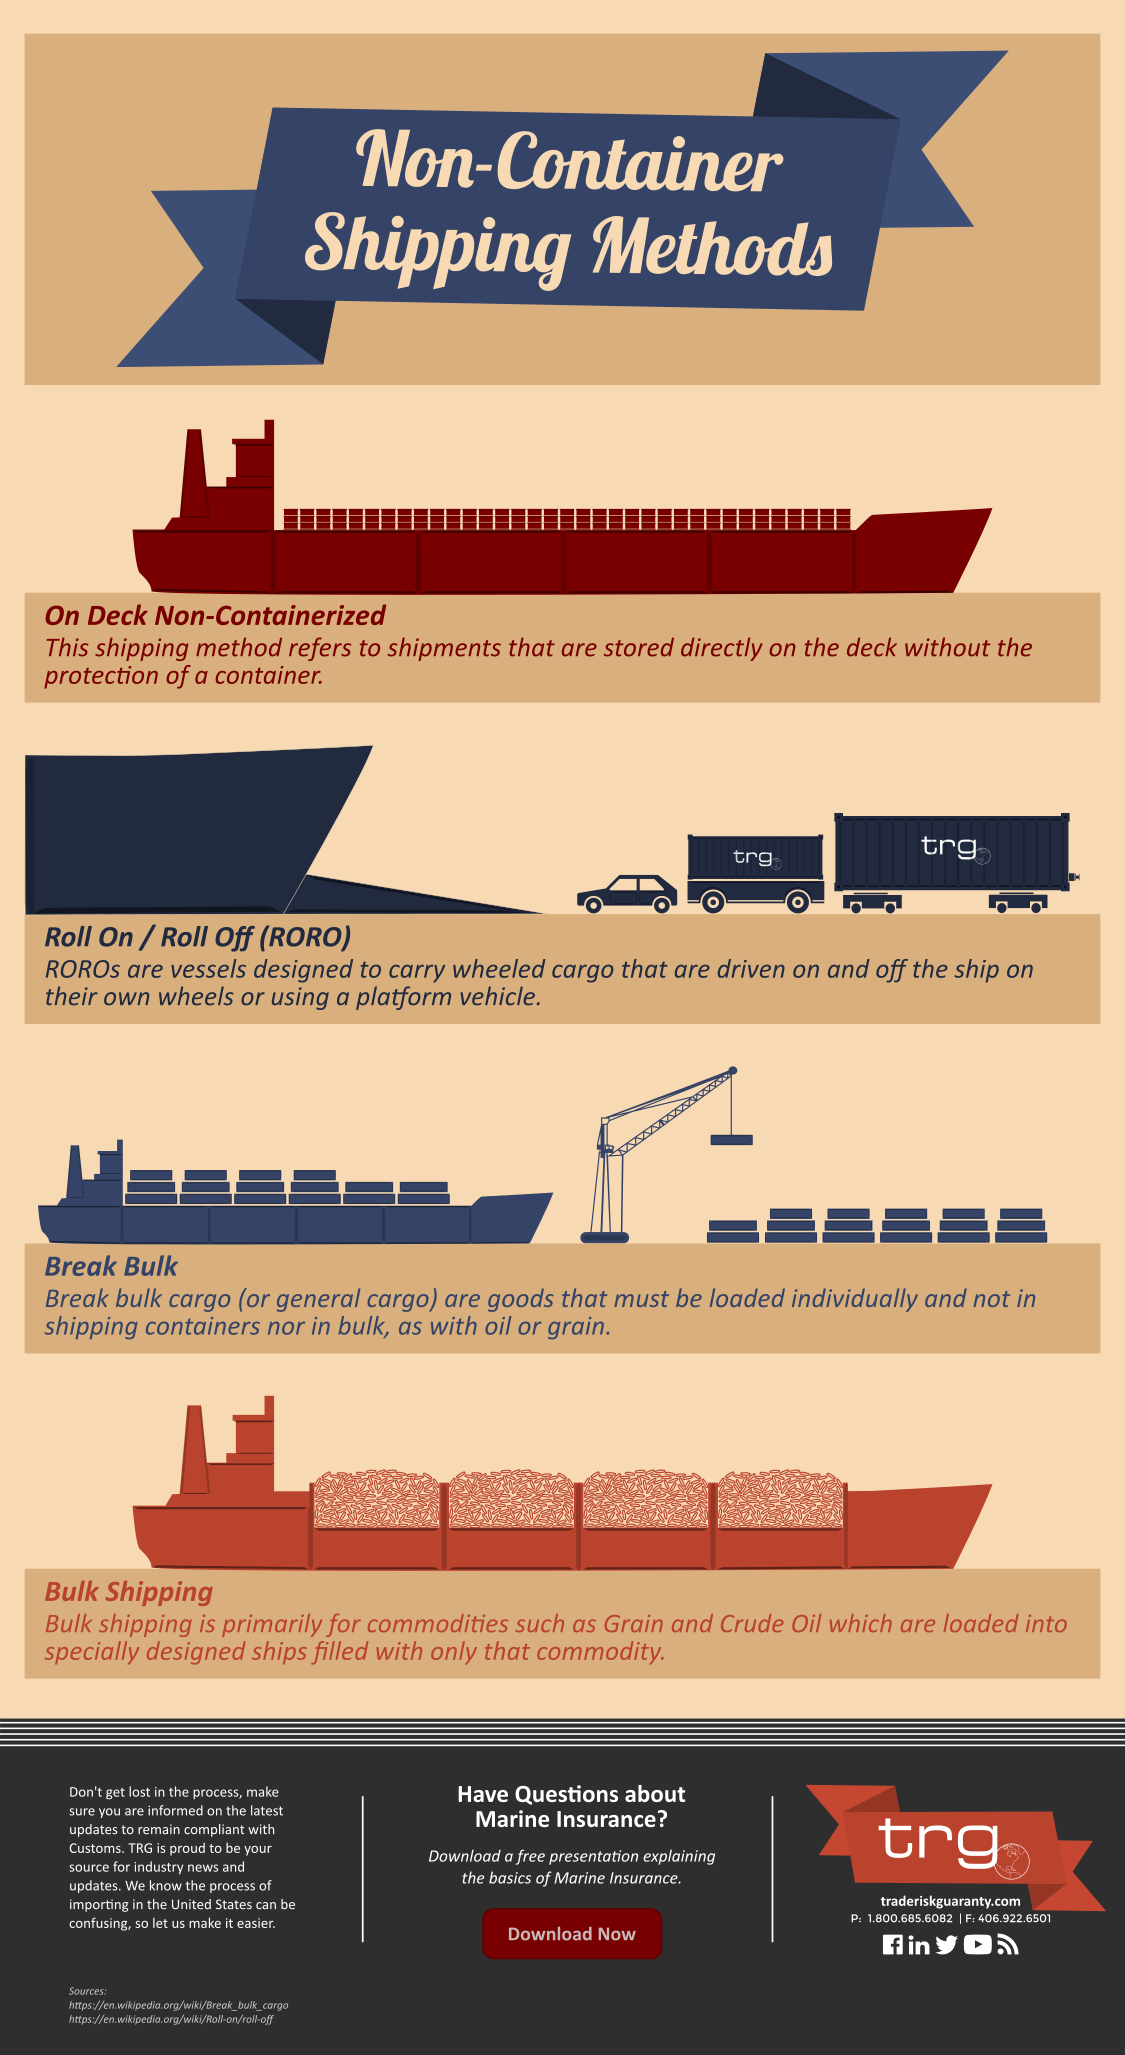 Infographic displaying the 4 alternative shipping methods that do not use containers.